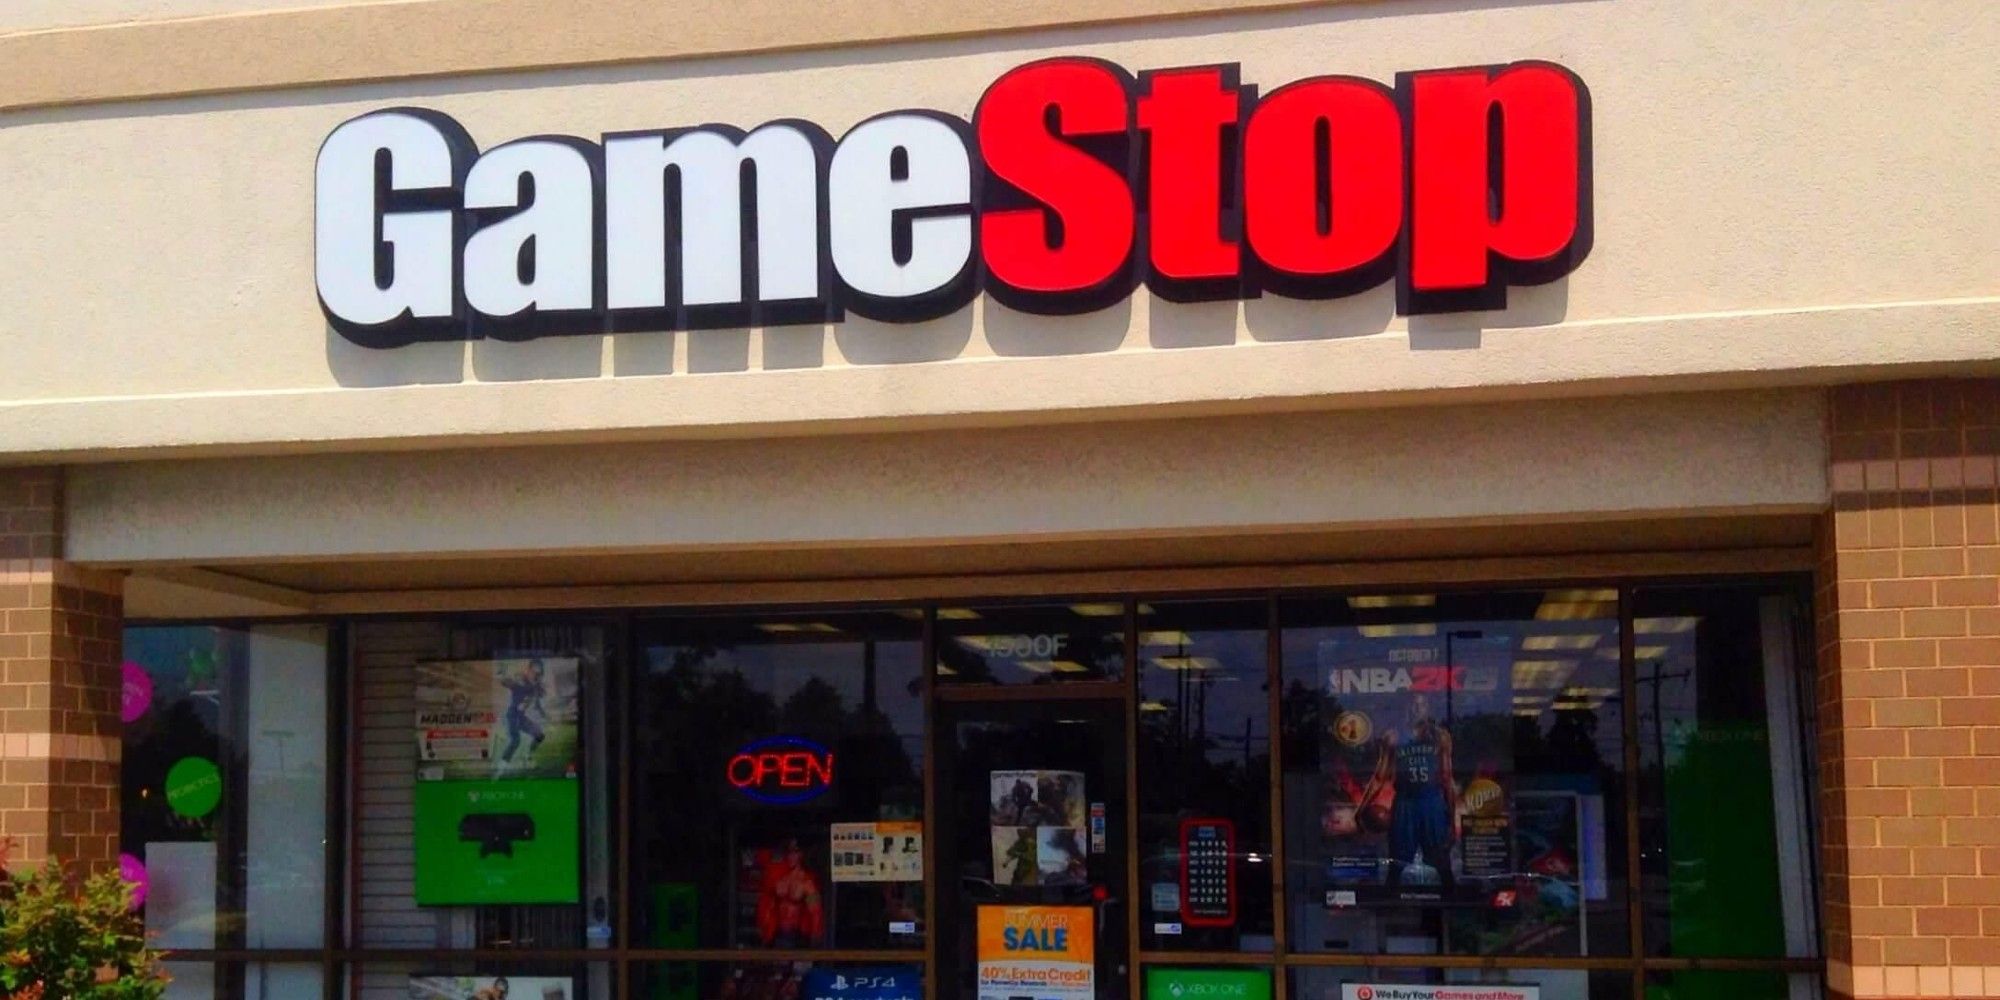 GameStop Store Manager Says Layoffs Have Begun, Stores Empty